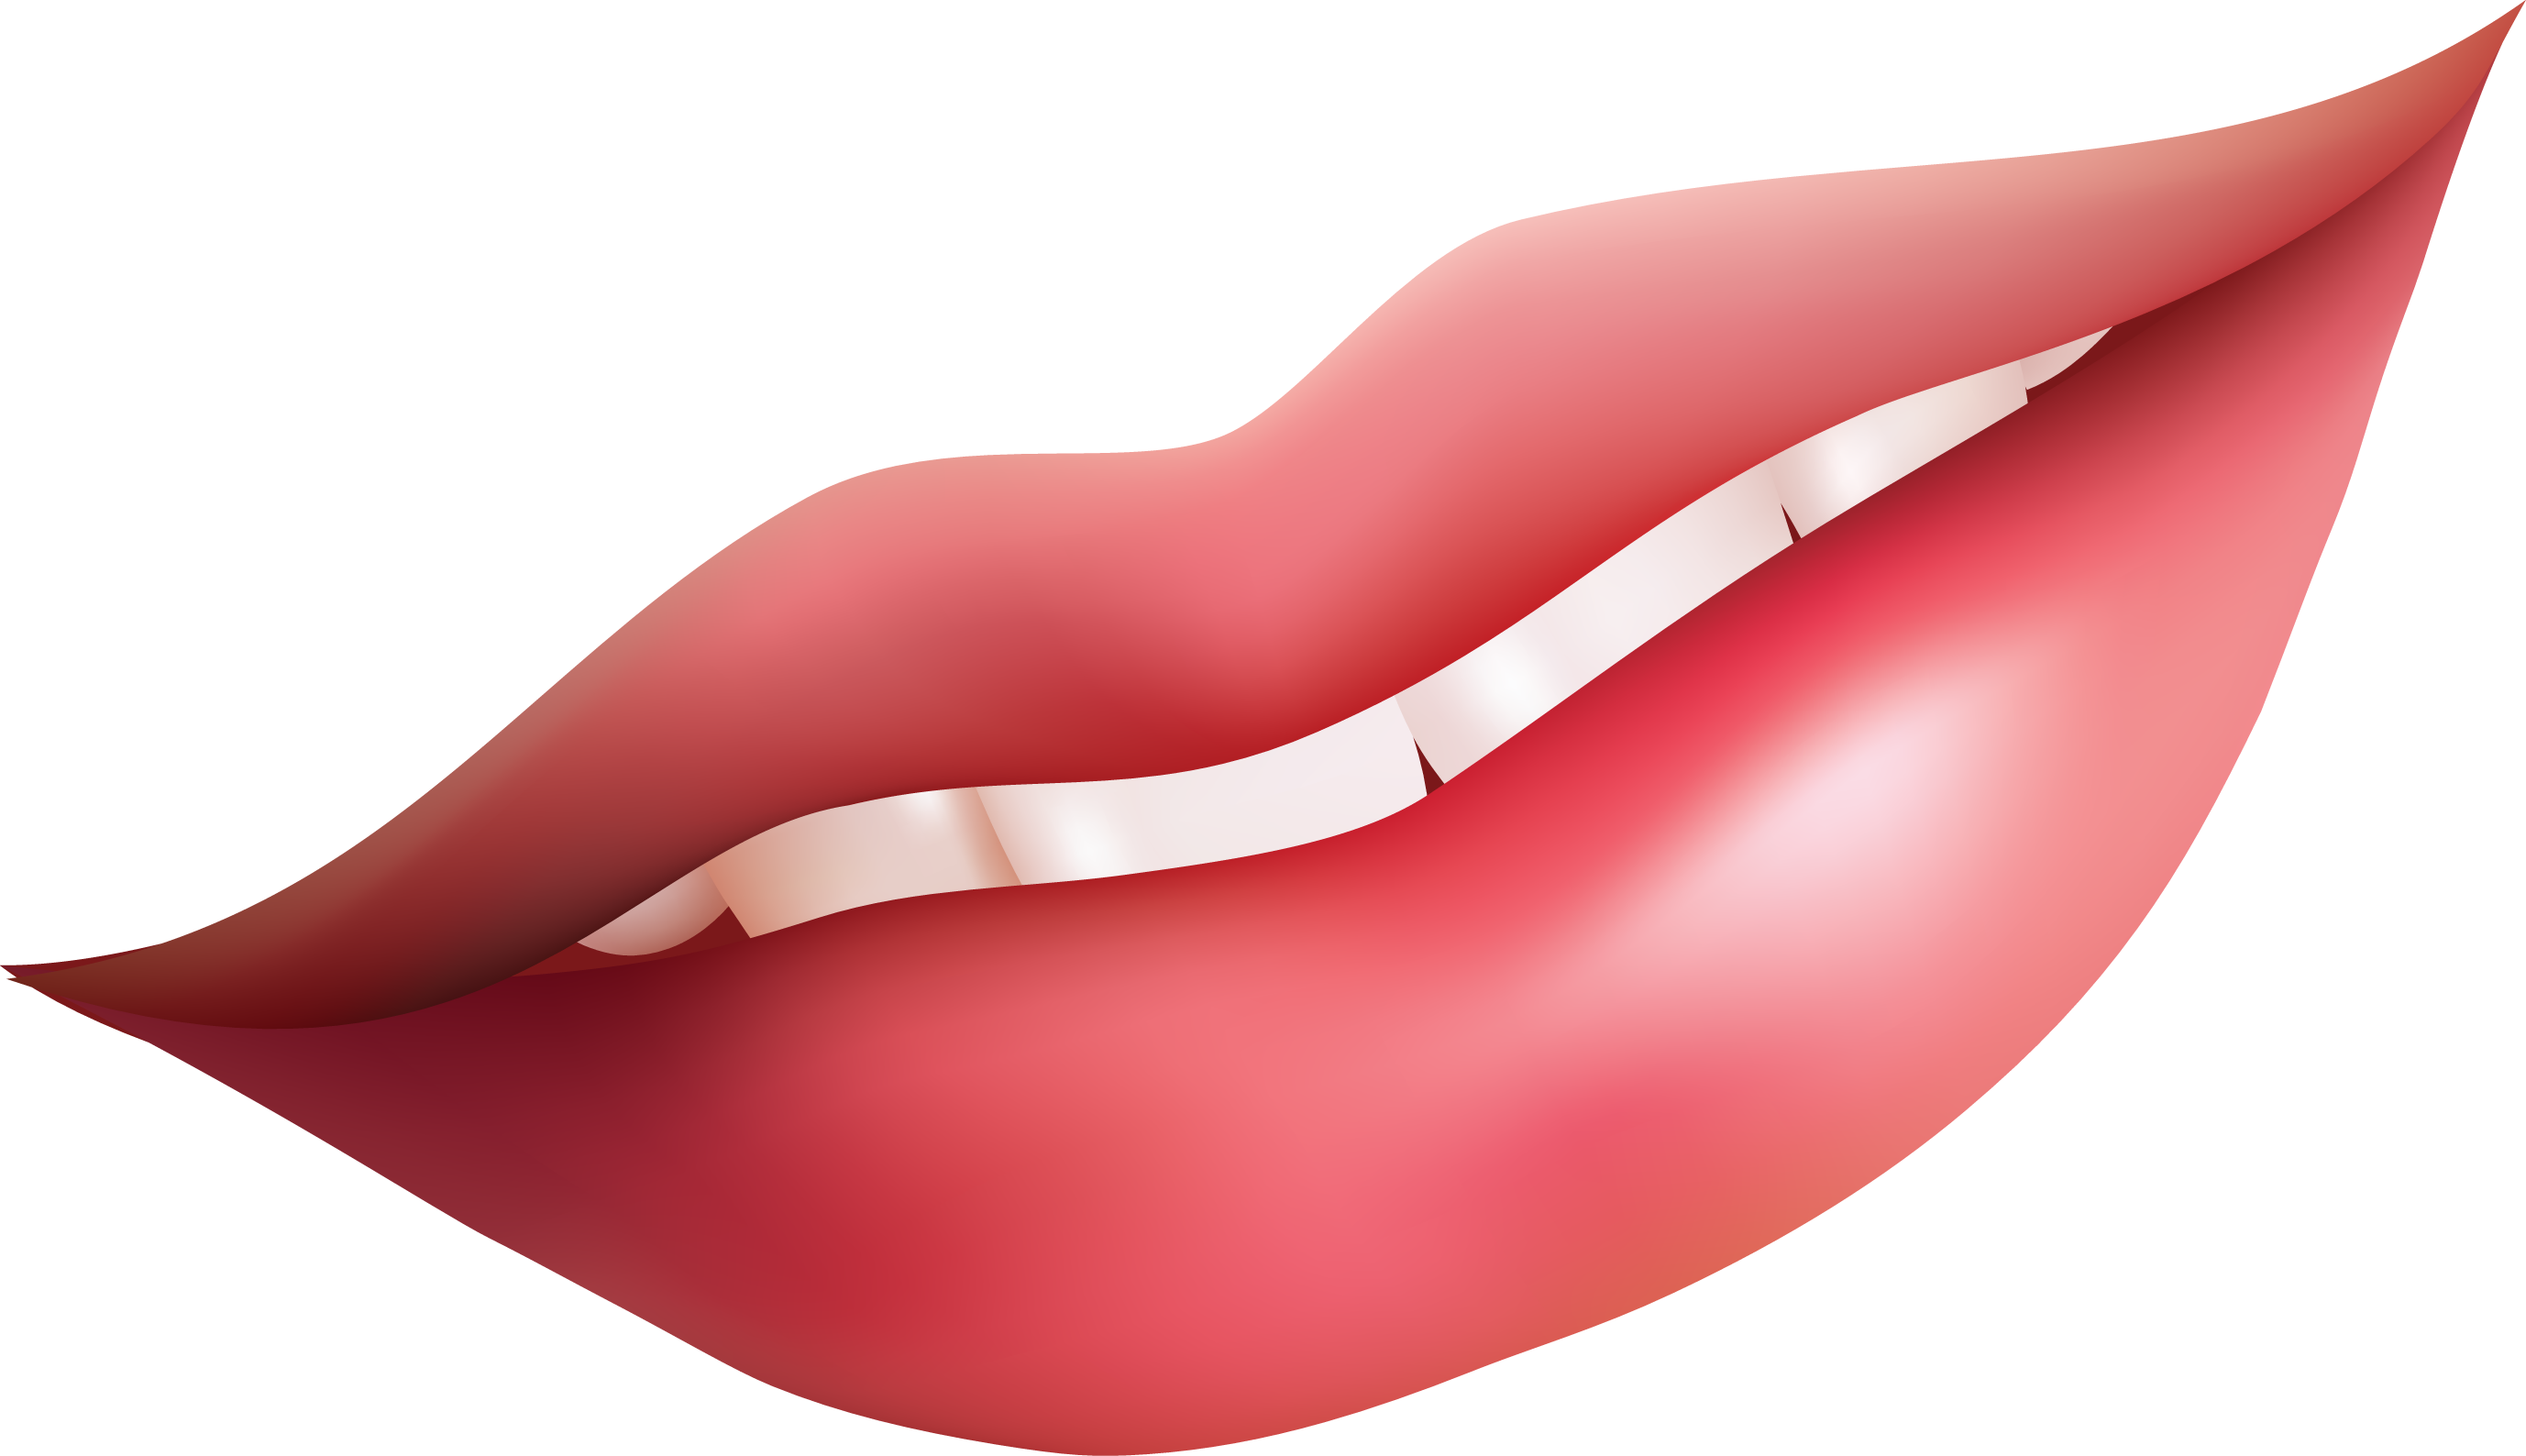 Free vector lips clipart image 0 7